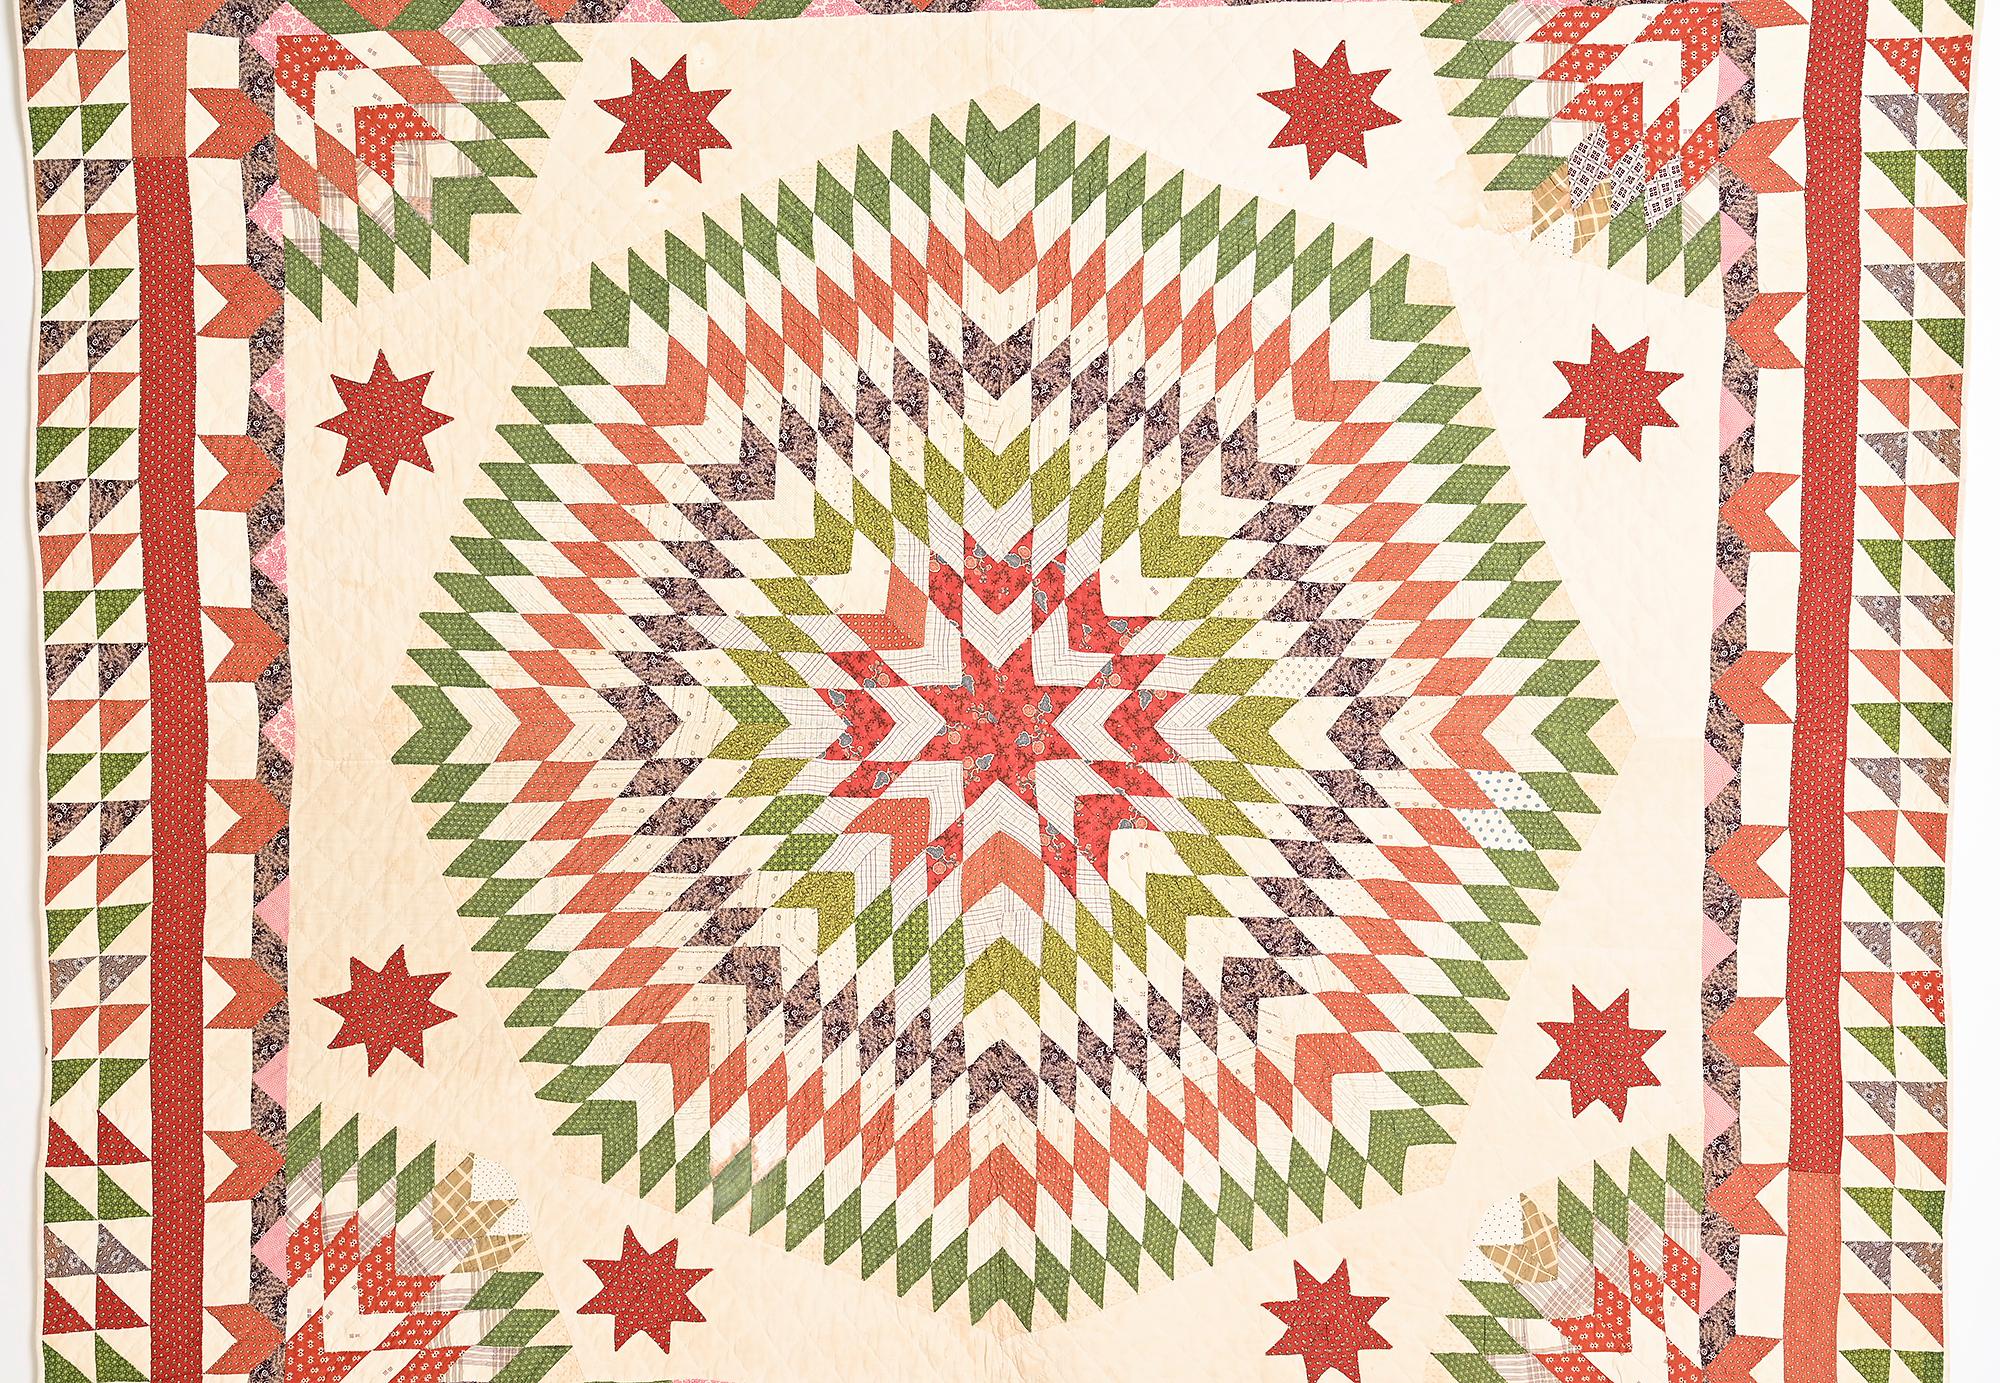 Calico Starburst quilt; Circa 1880; Pennsylvania origin. Splashy starburst quilt with many additional patterns. The corners hold the pattern together while LeMoyne Stars dance around the perimeter. Half stars and two rows of triangles make for